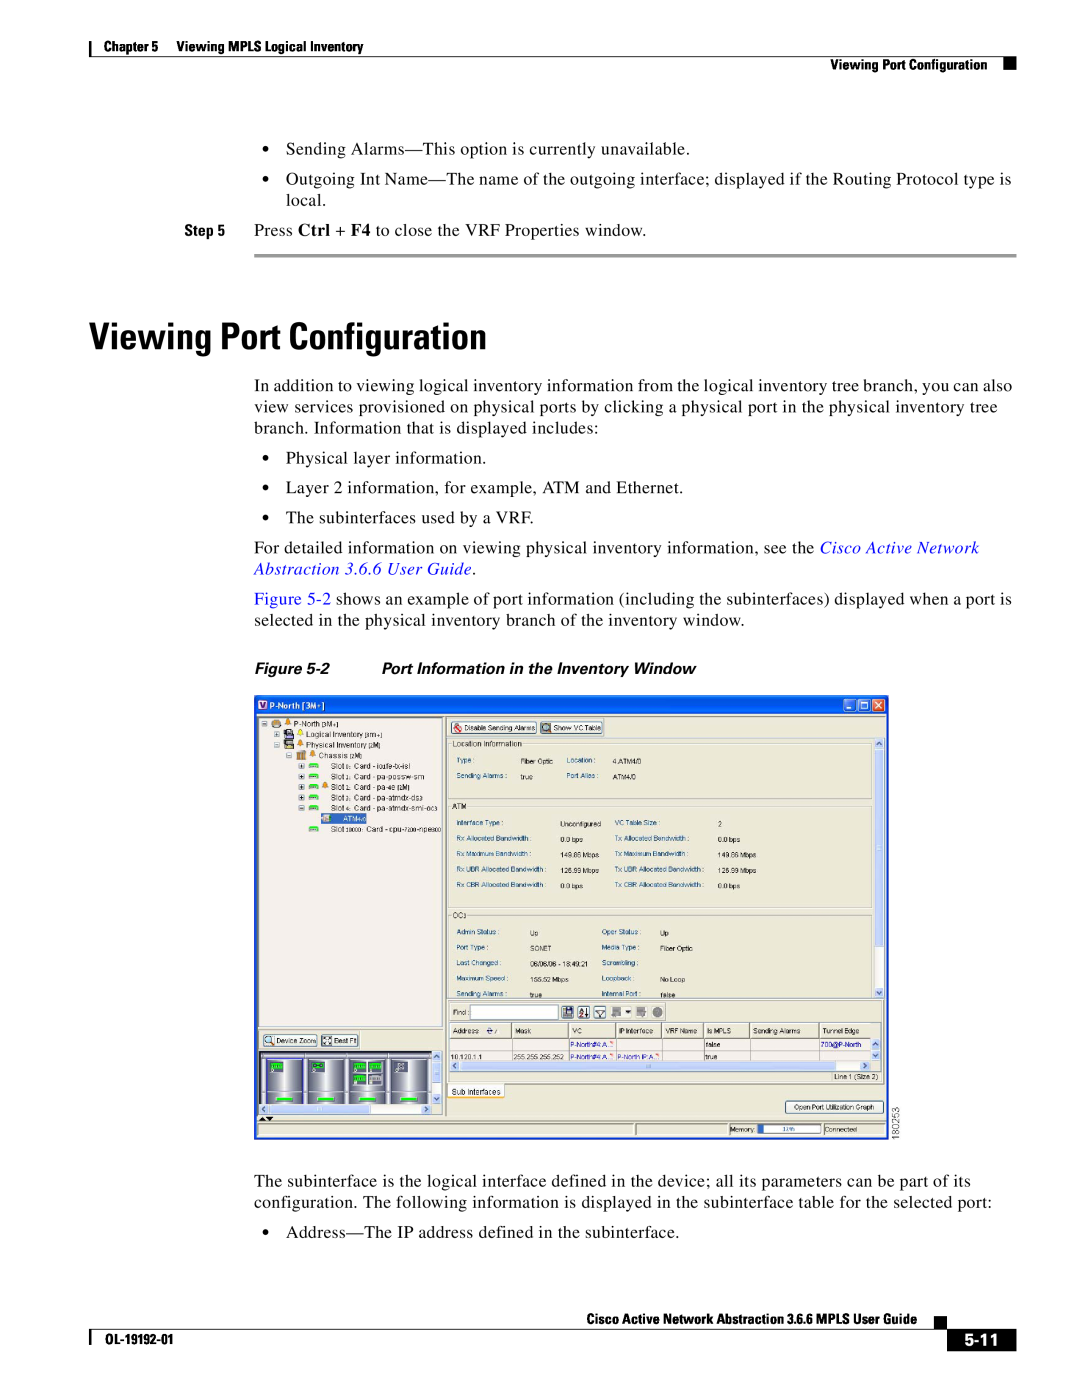 Cisco Systems 3.6.6 manual Viewing Port Configuration, 5-11, 2 Port Information in the Inventory Window 